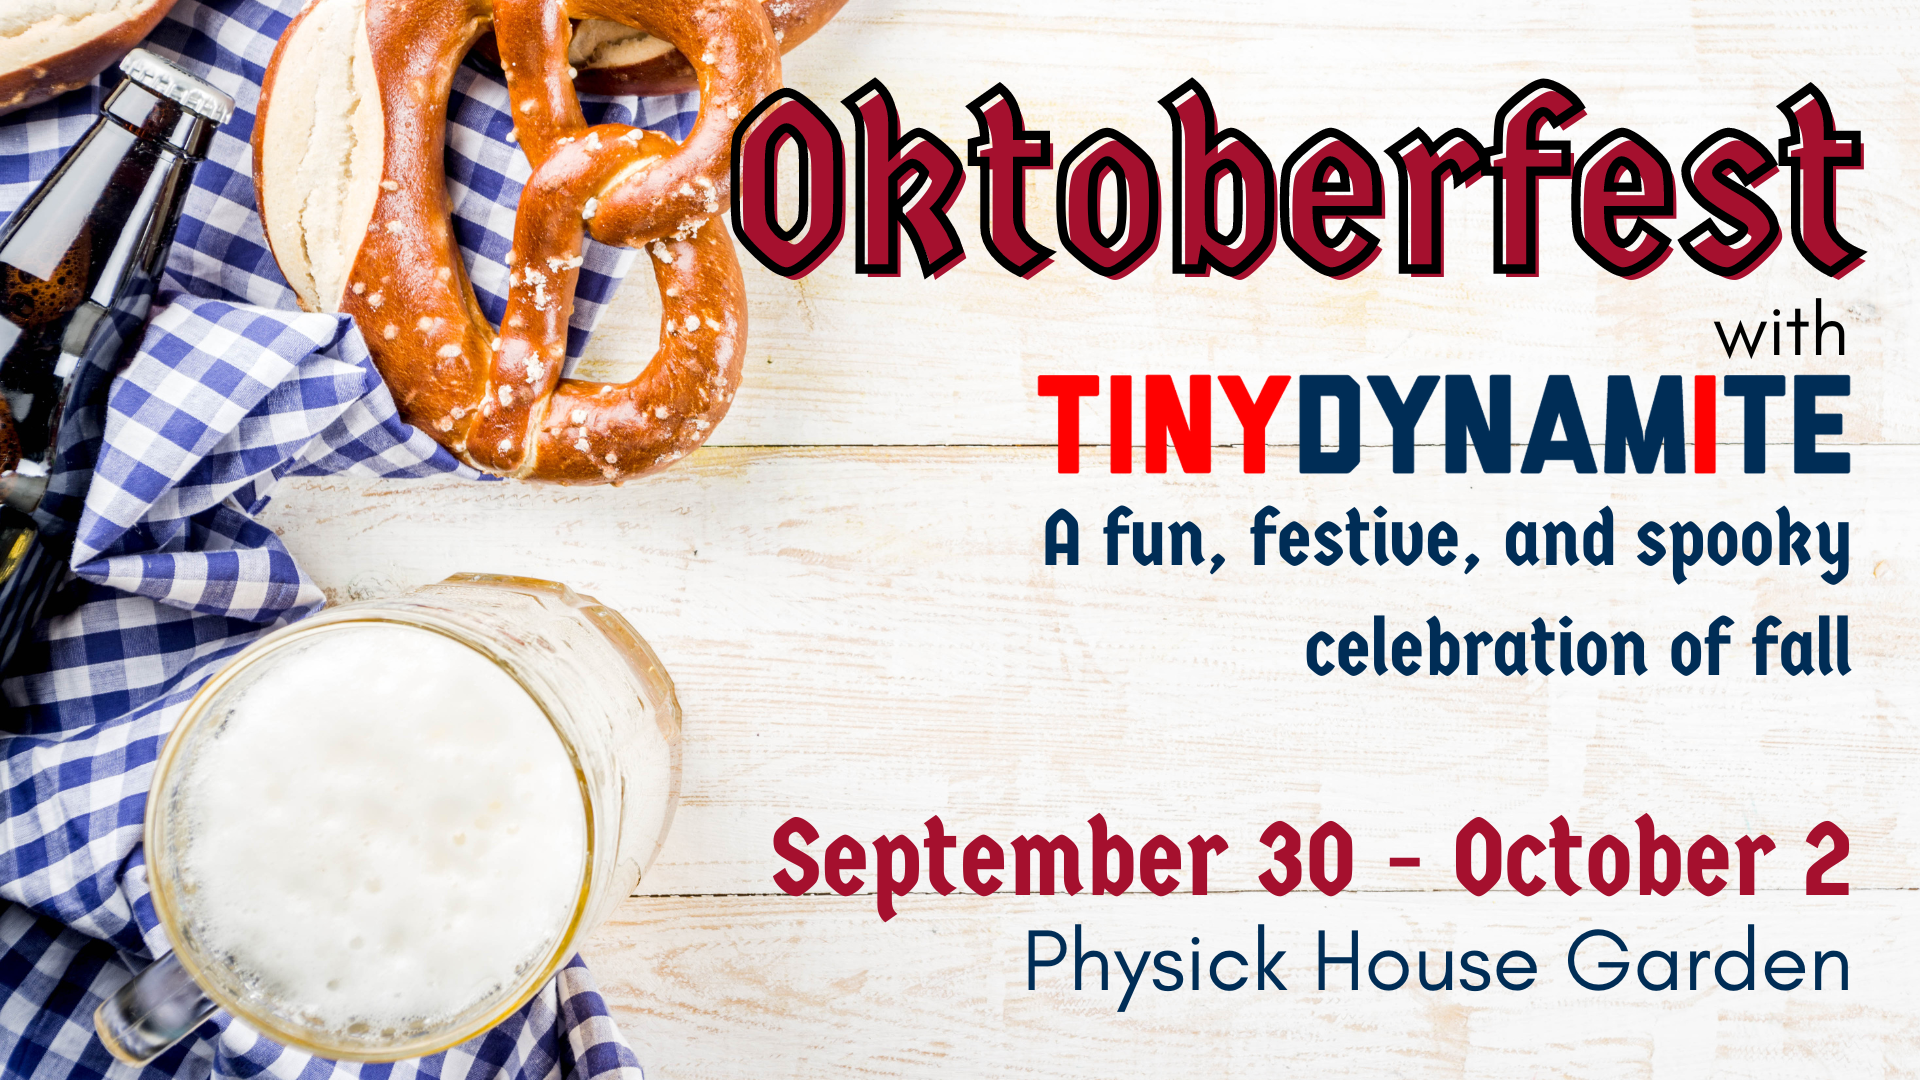 An image of soft pretzels and beer, with the text "Oktoberfest with Tiny Dynamite; A fun, festive, and spooky celebration of fall; September 30- October 2; Physick House Garden